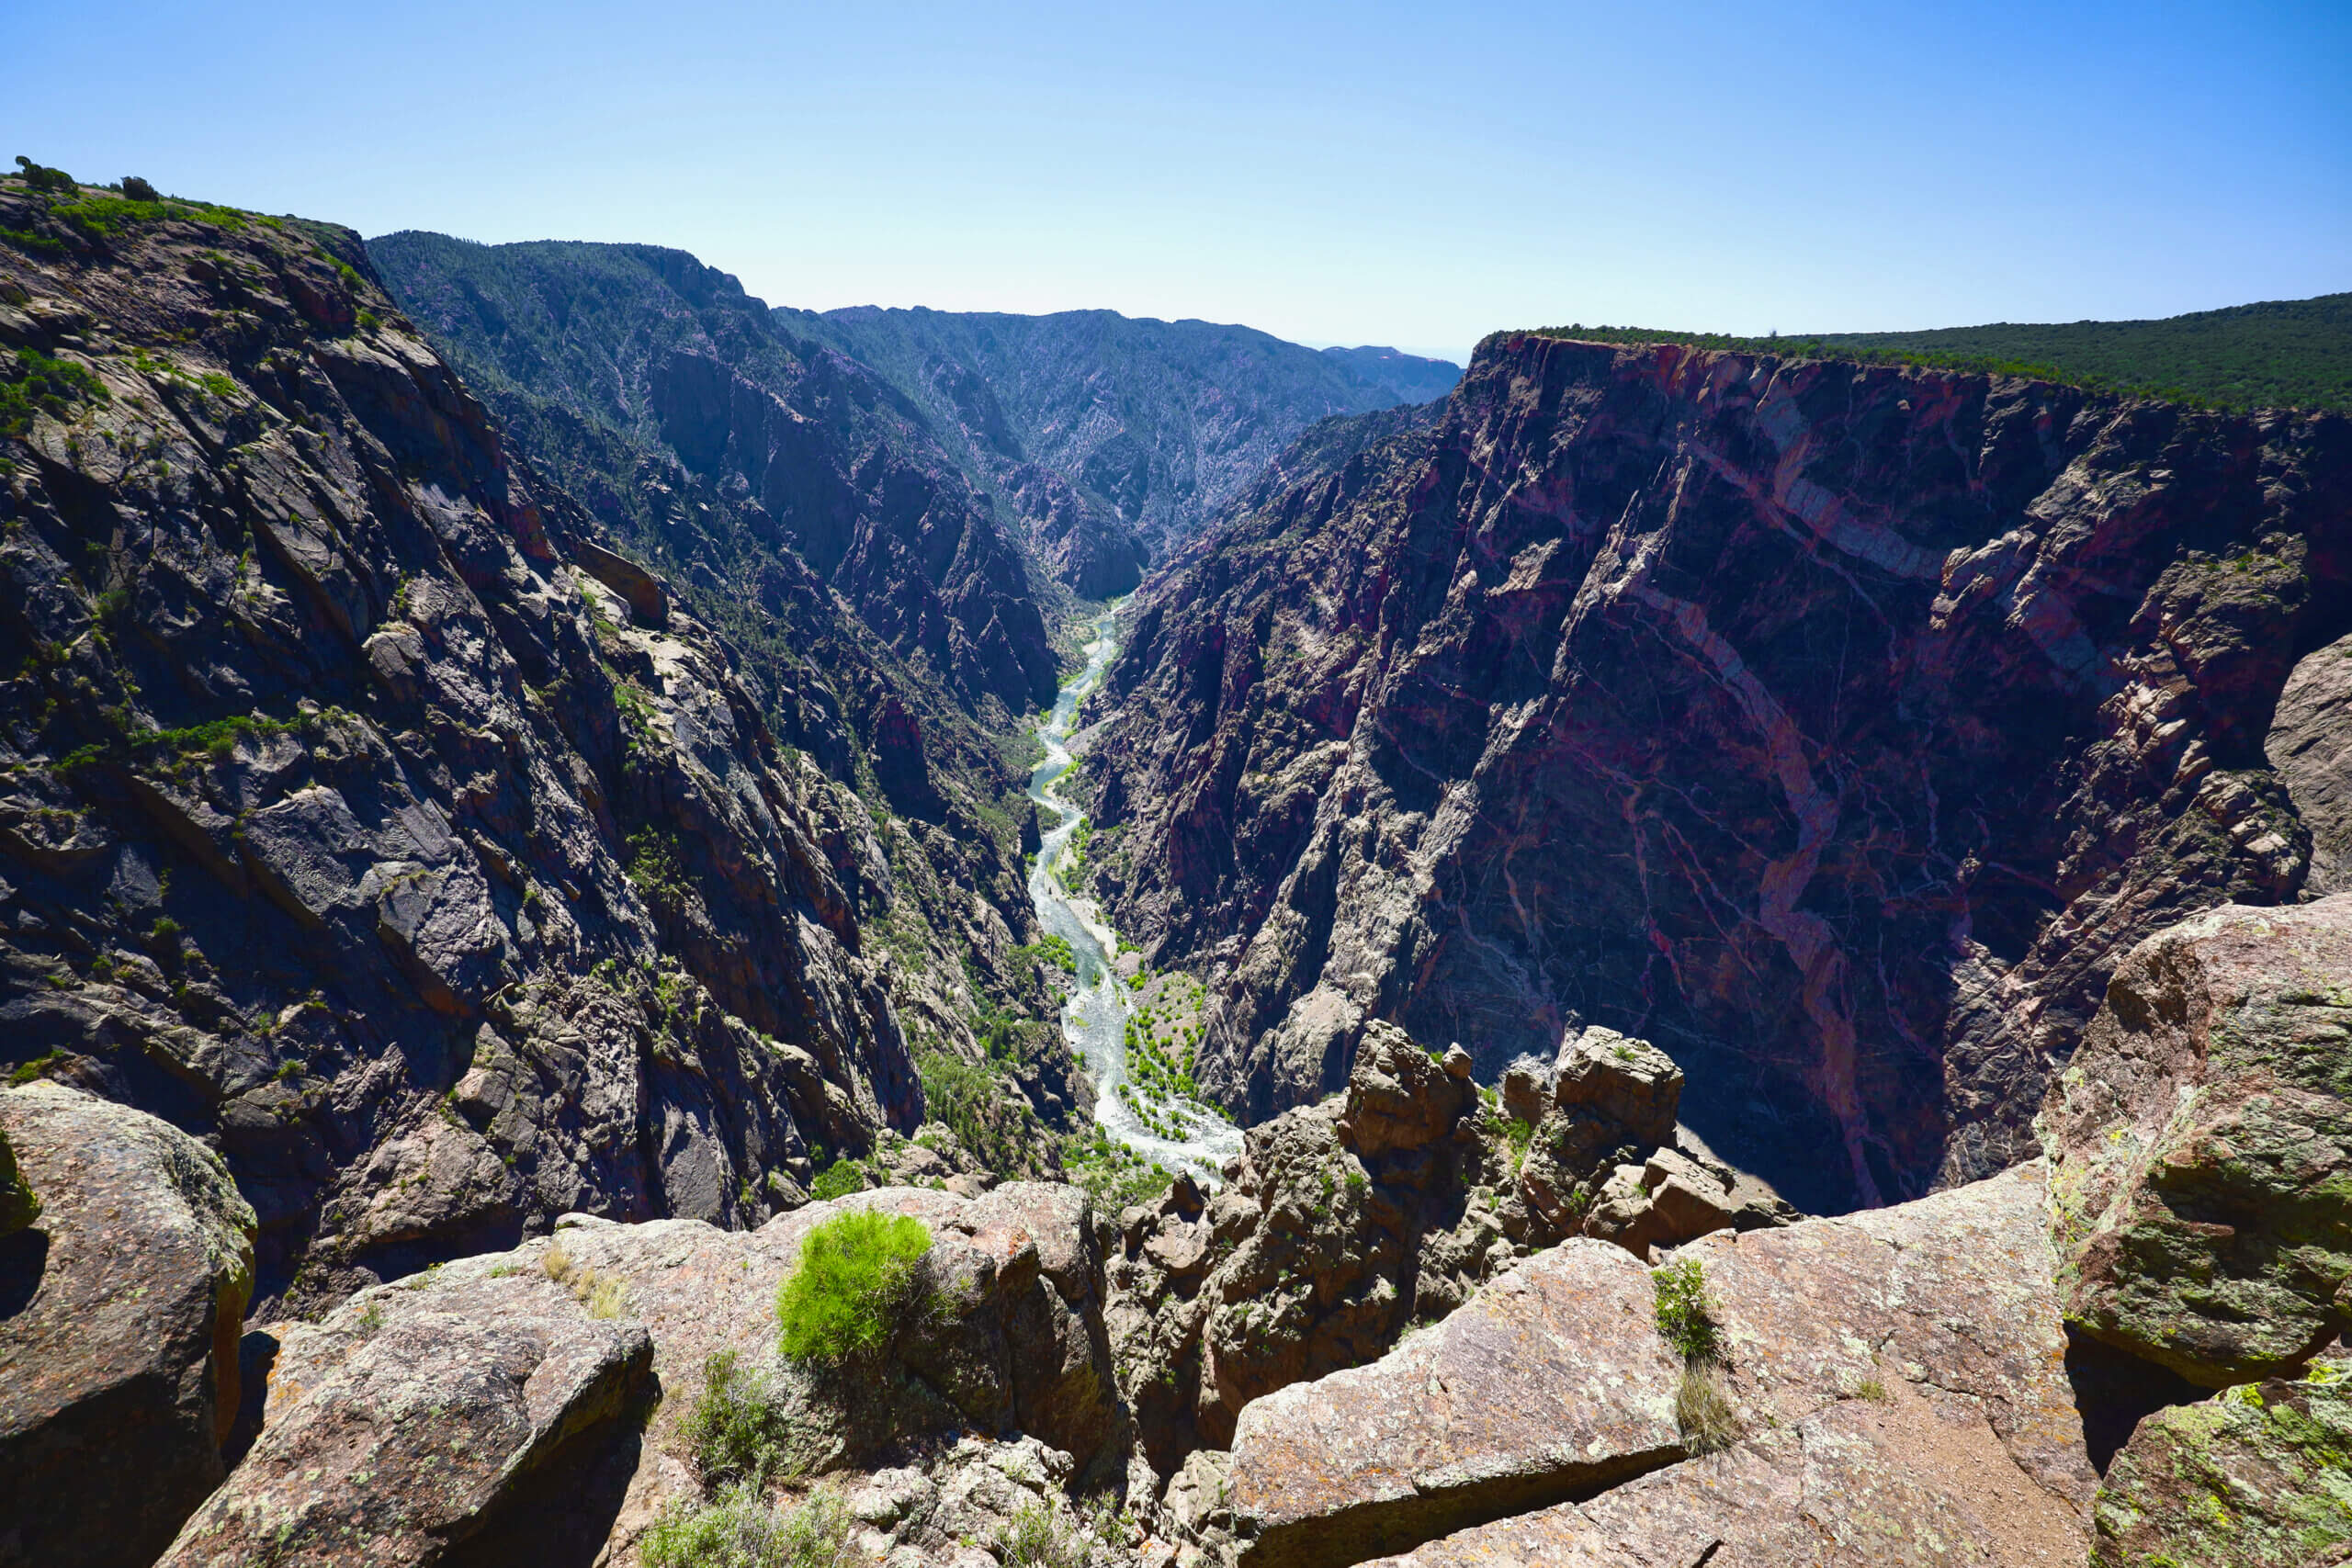 One of the national parks in Colorado, Black Canyon of the Gunnison provides unparalleled canyon views without the crowds of other famous canyons.